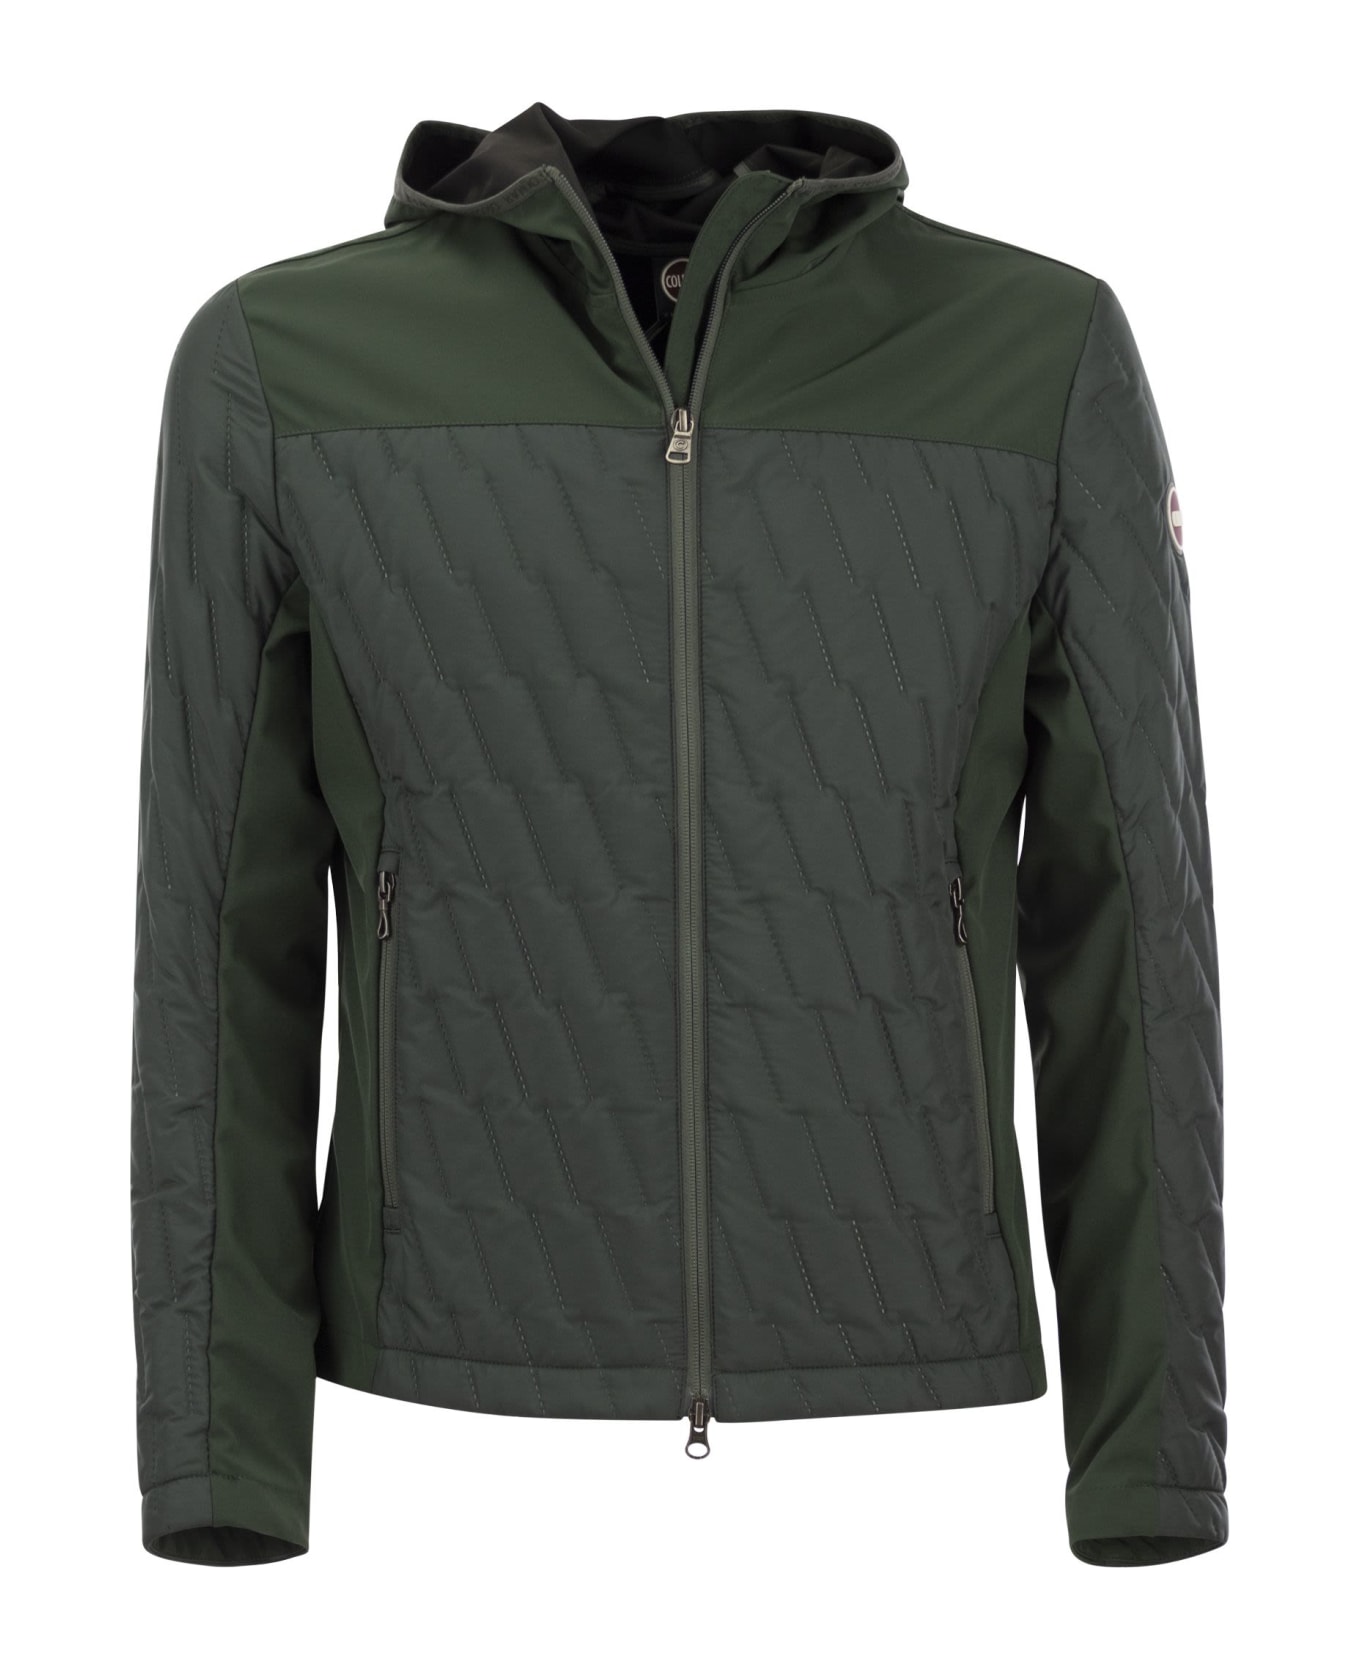 Colmar Padded Jacket With Ultrasonic Seams - Olive Green